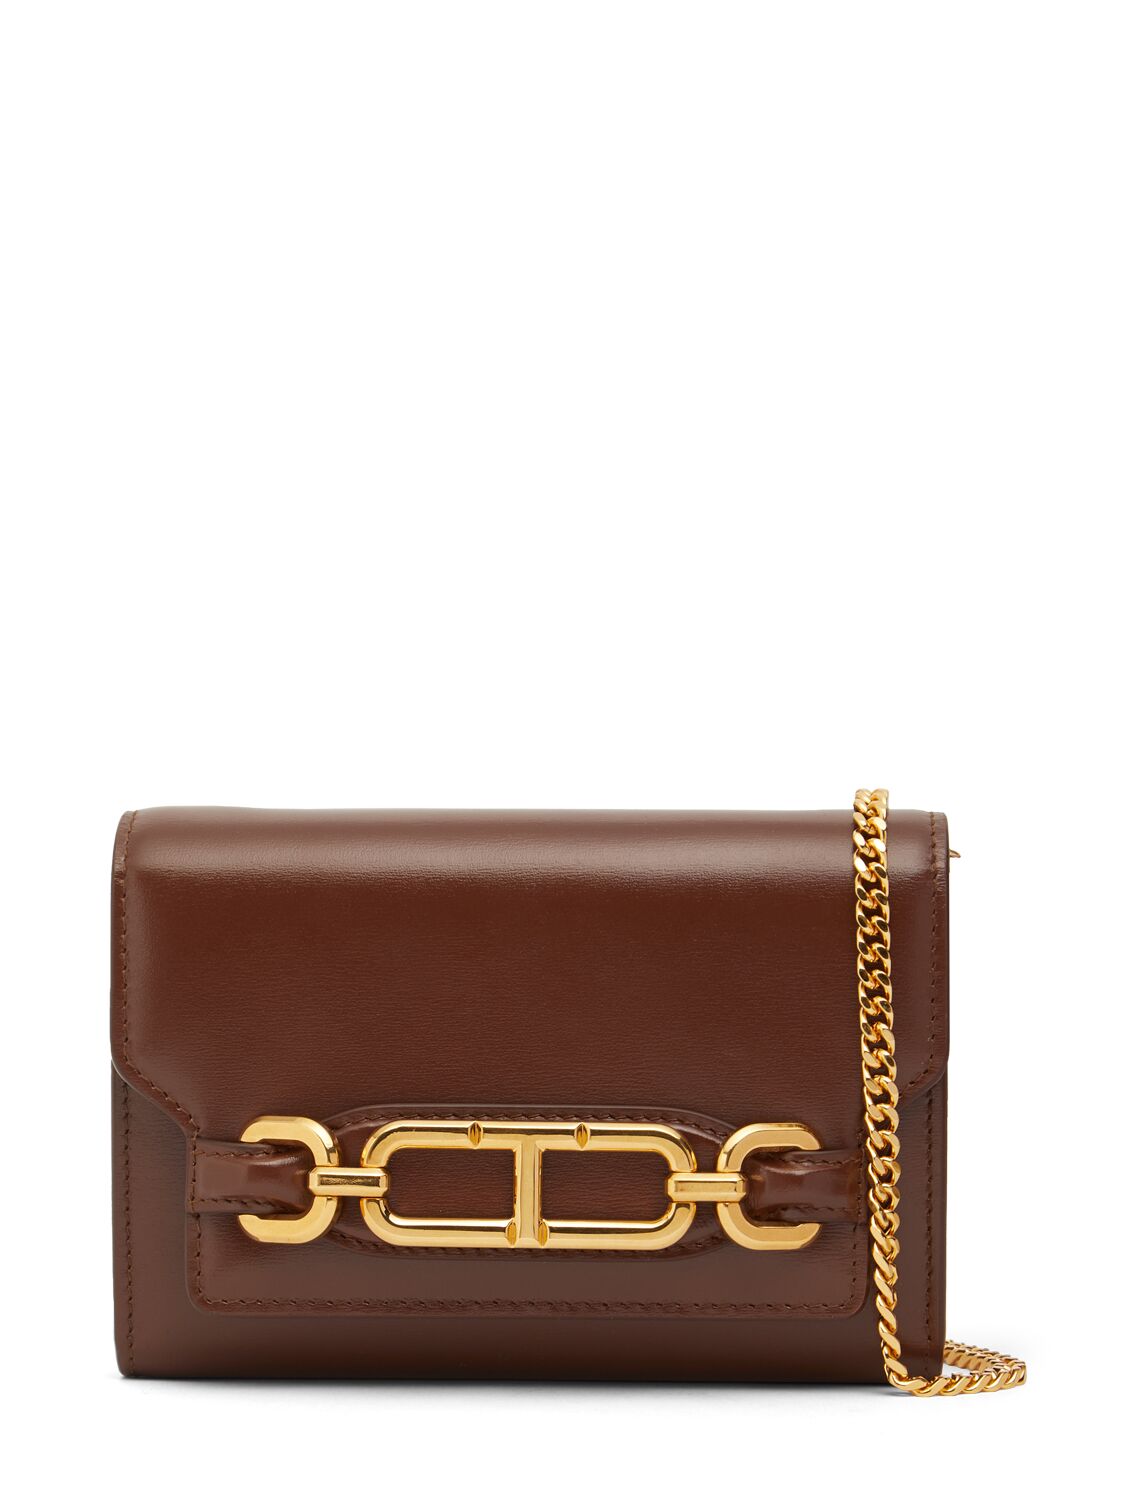 Tom Ford Mini Whitney Box Leather Shoulder Bag In Saddle Brown